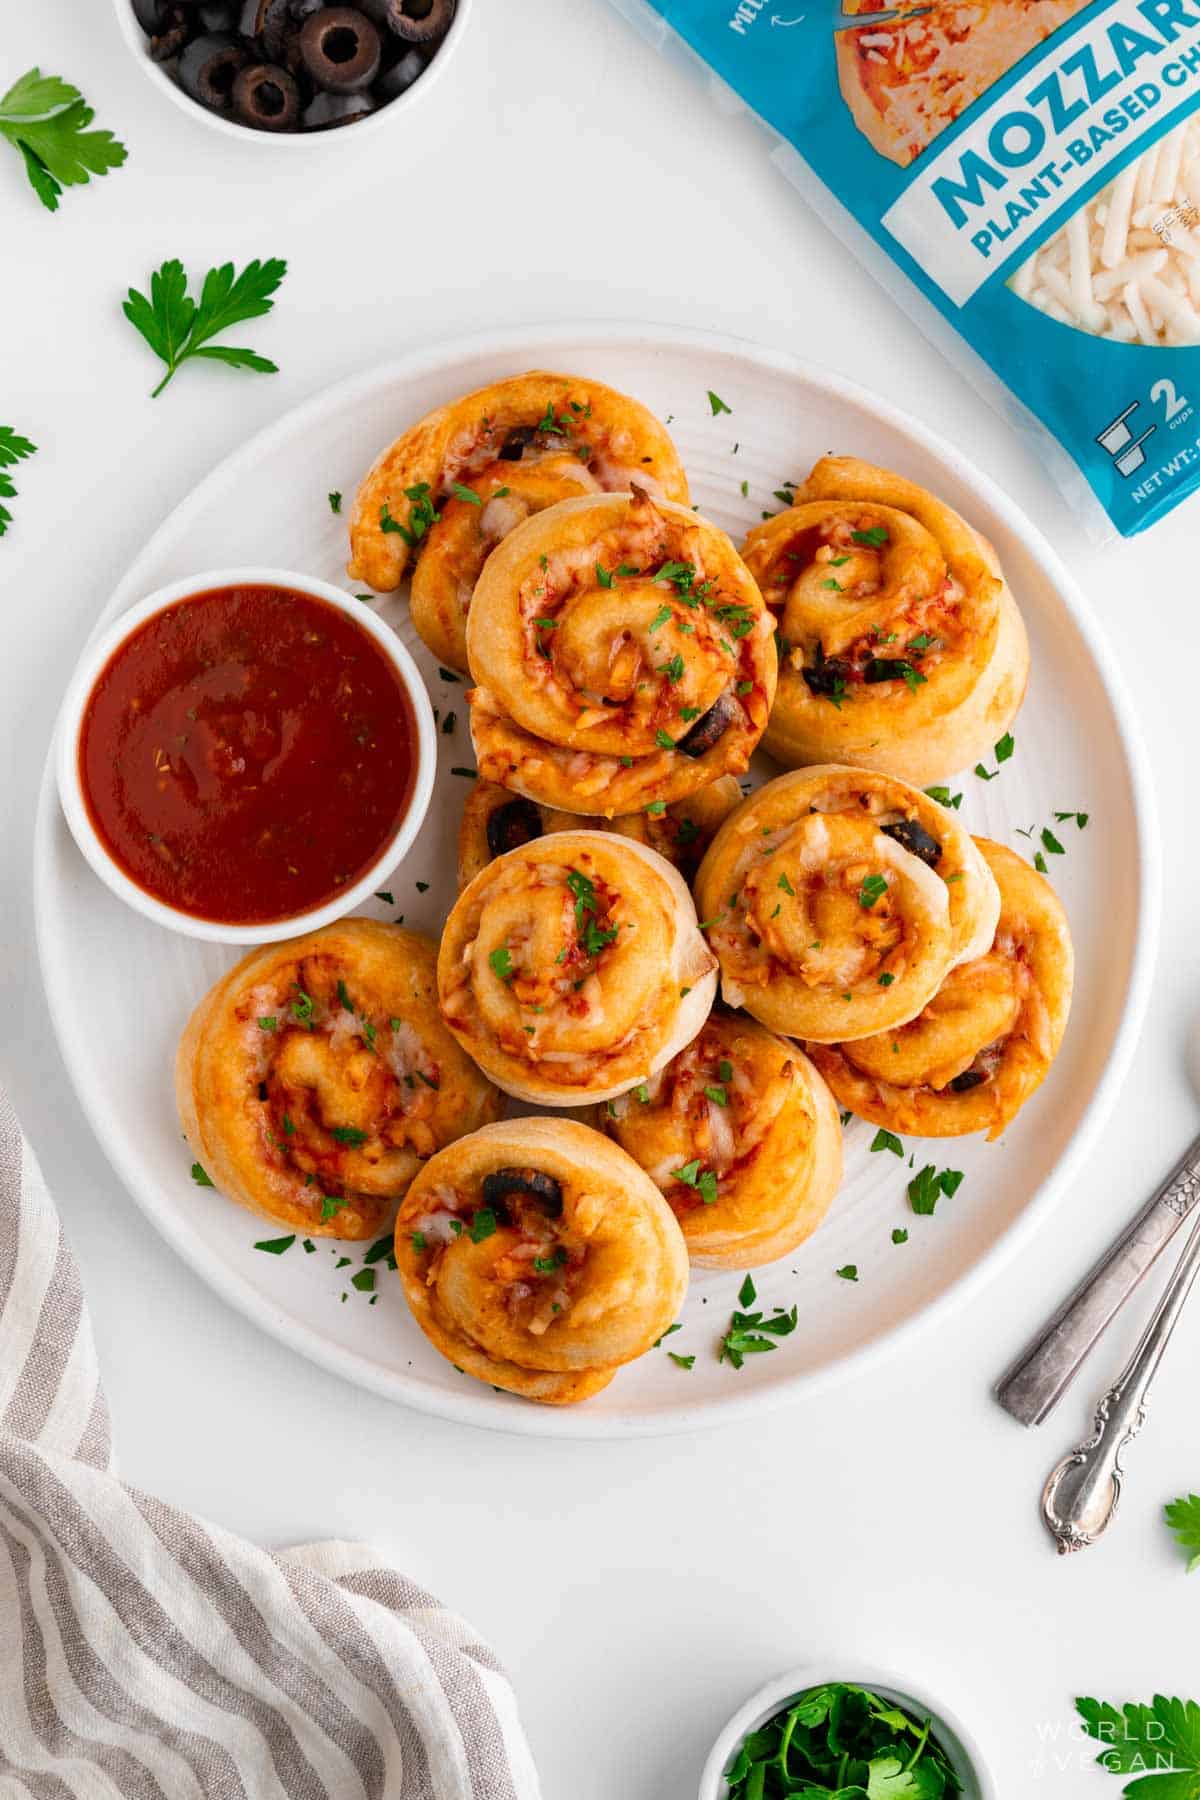 Finished pizza rolls plated with fresh herbs.